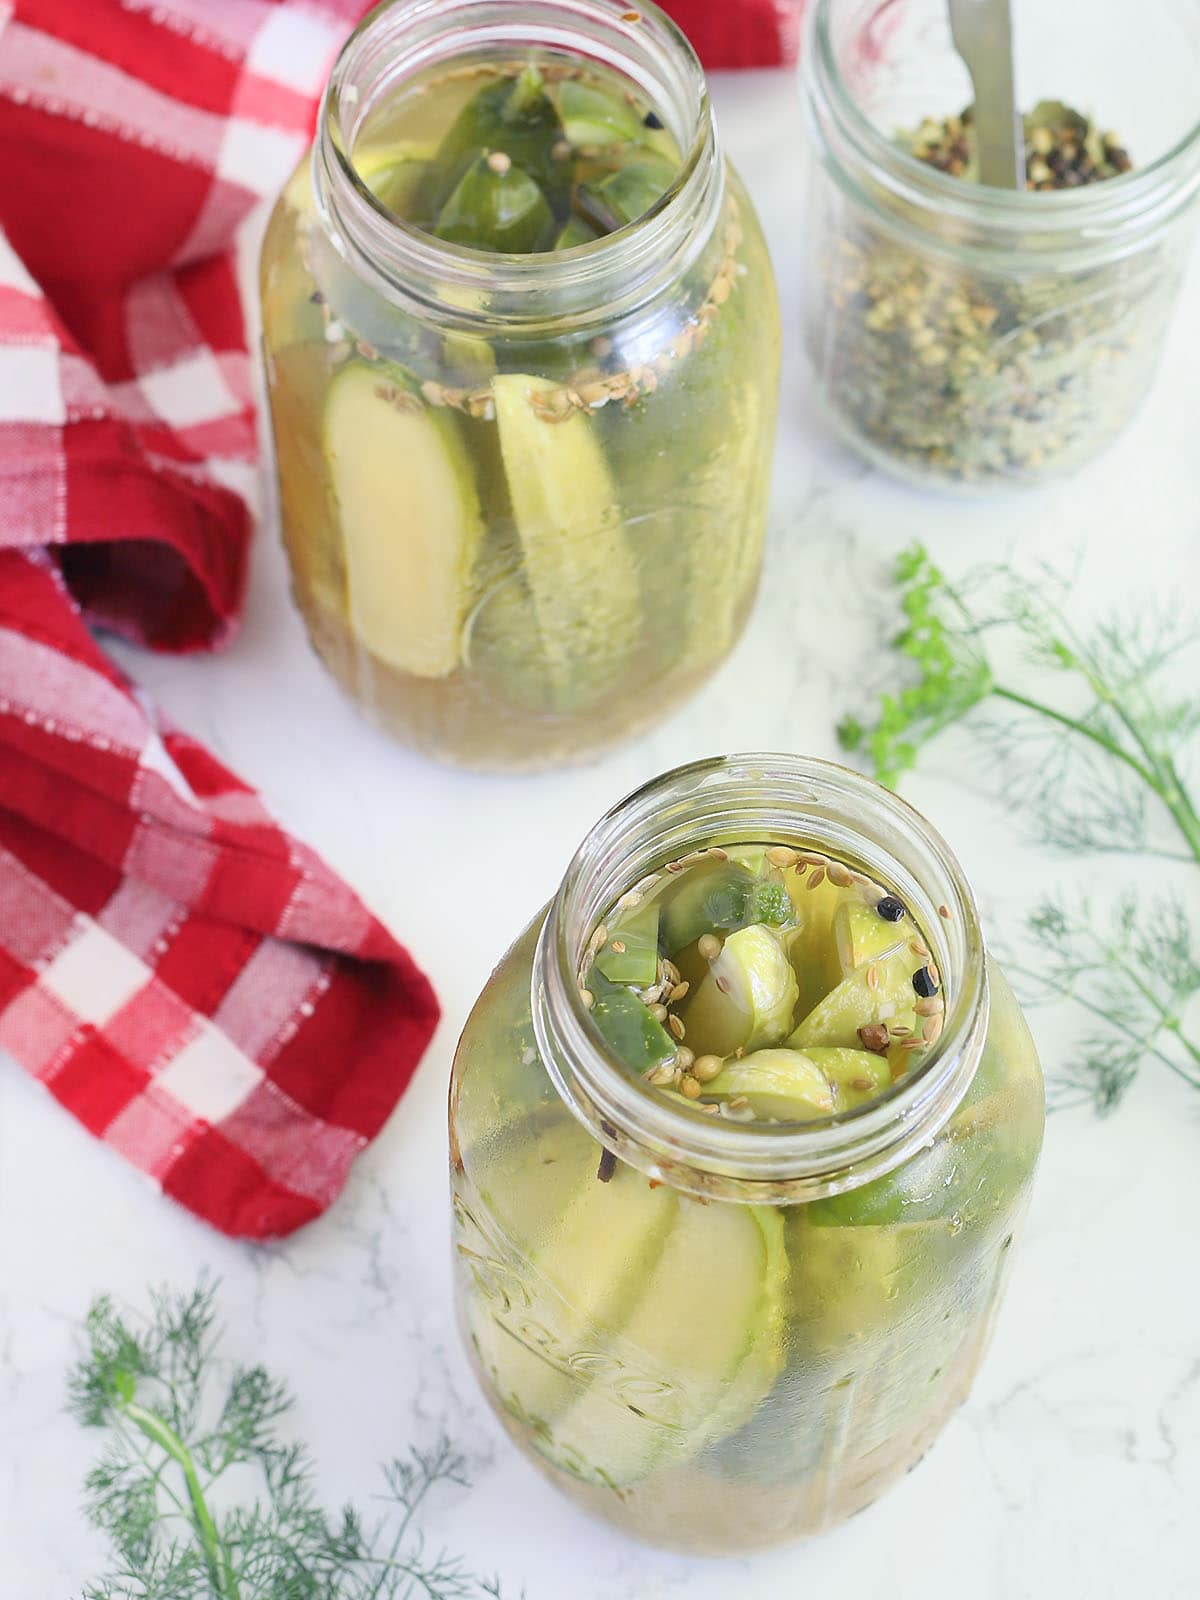 two quart mason jars of dill pickles spears with pickling spices and fresh dill on the side